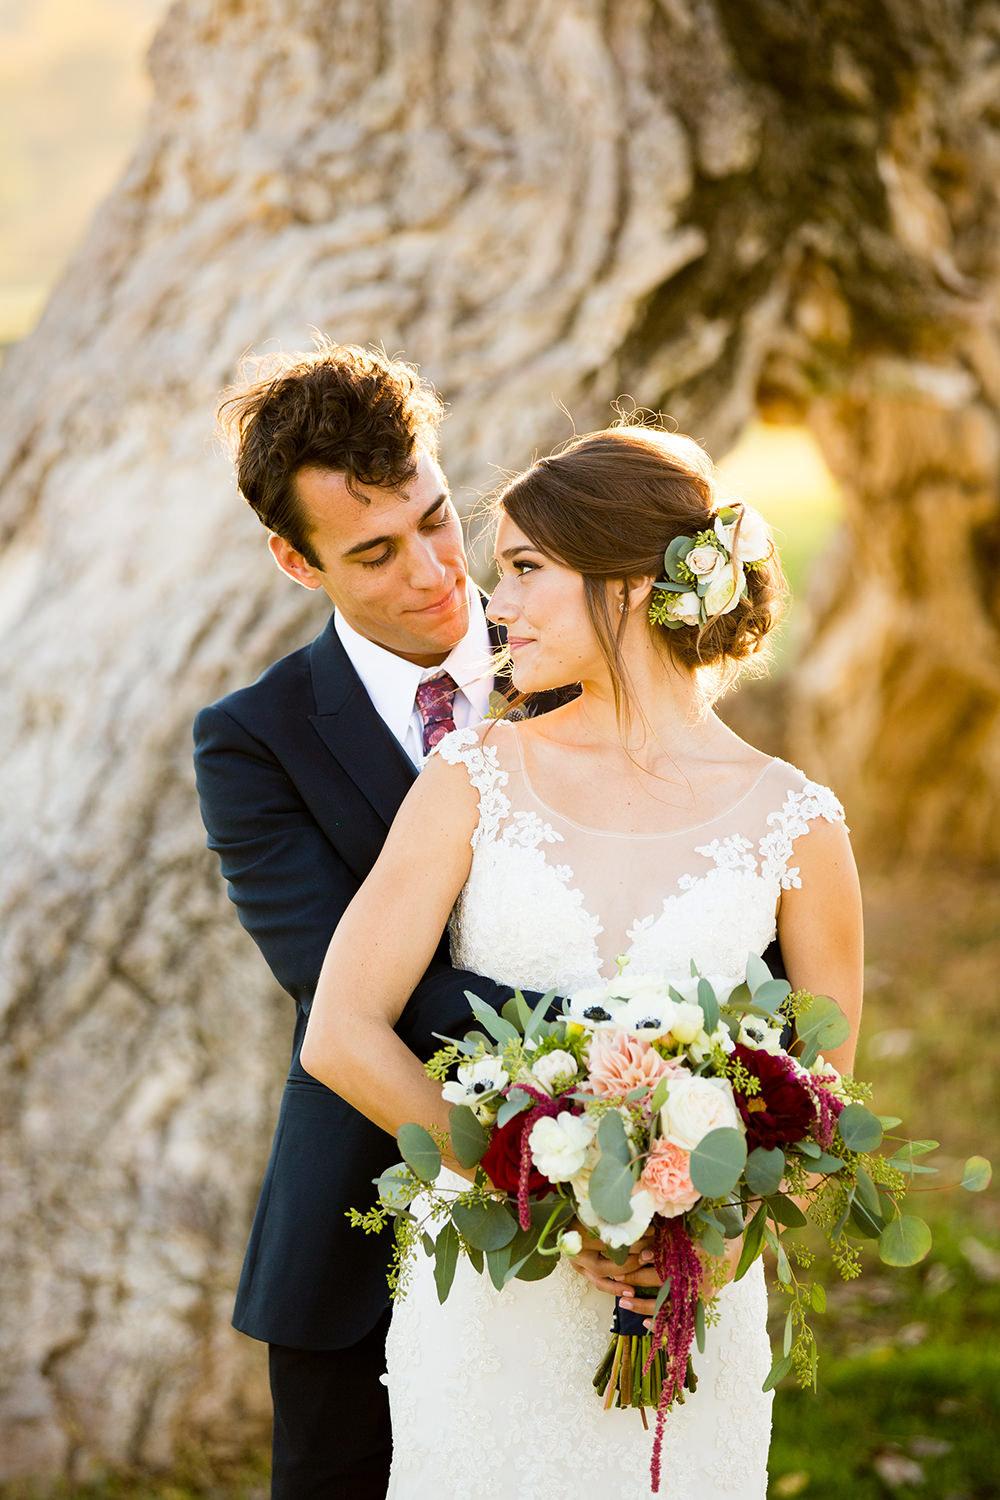 beautiful light with bride and groom at carlton oaks country club